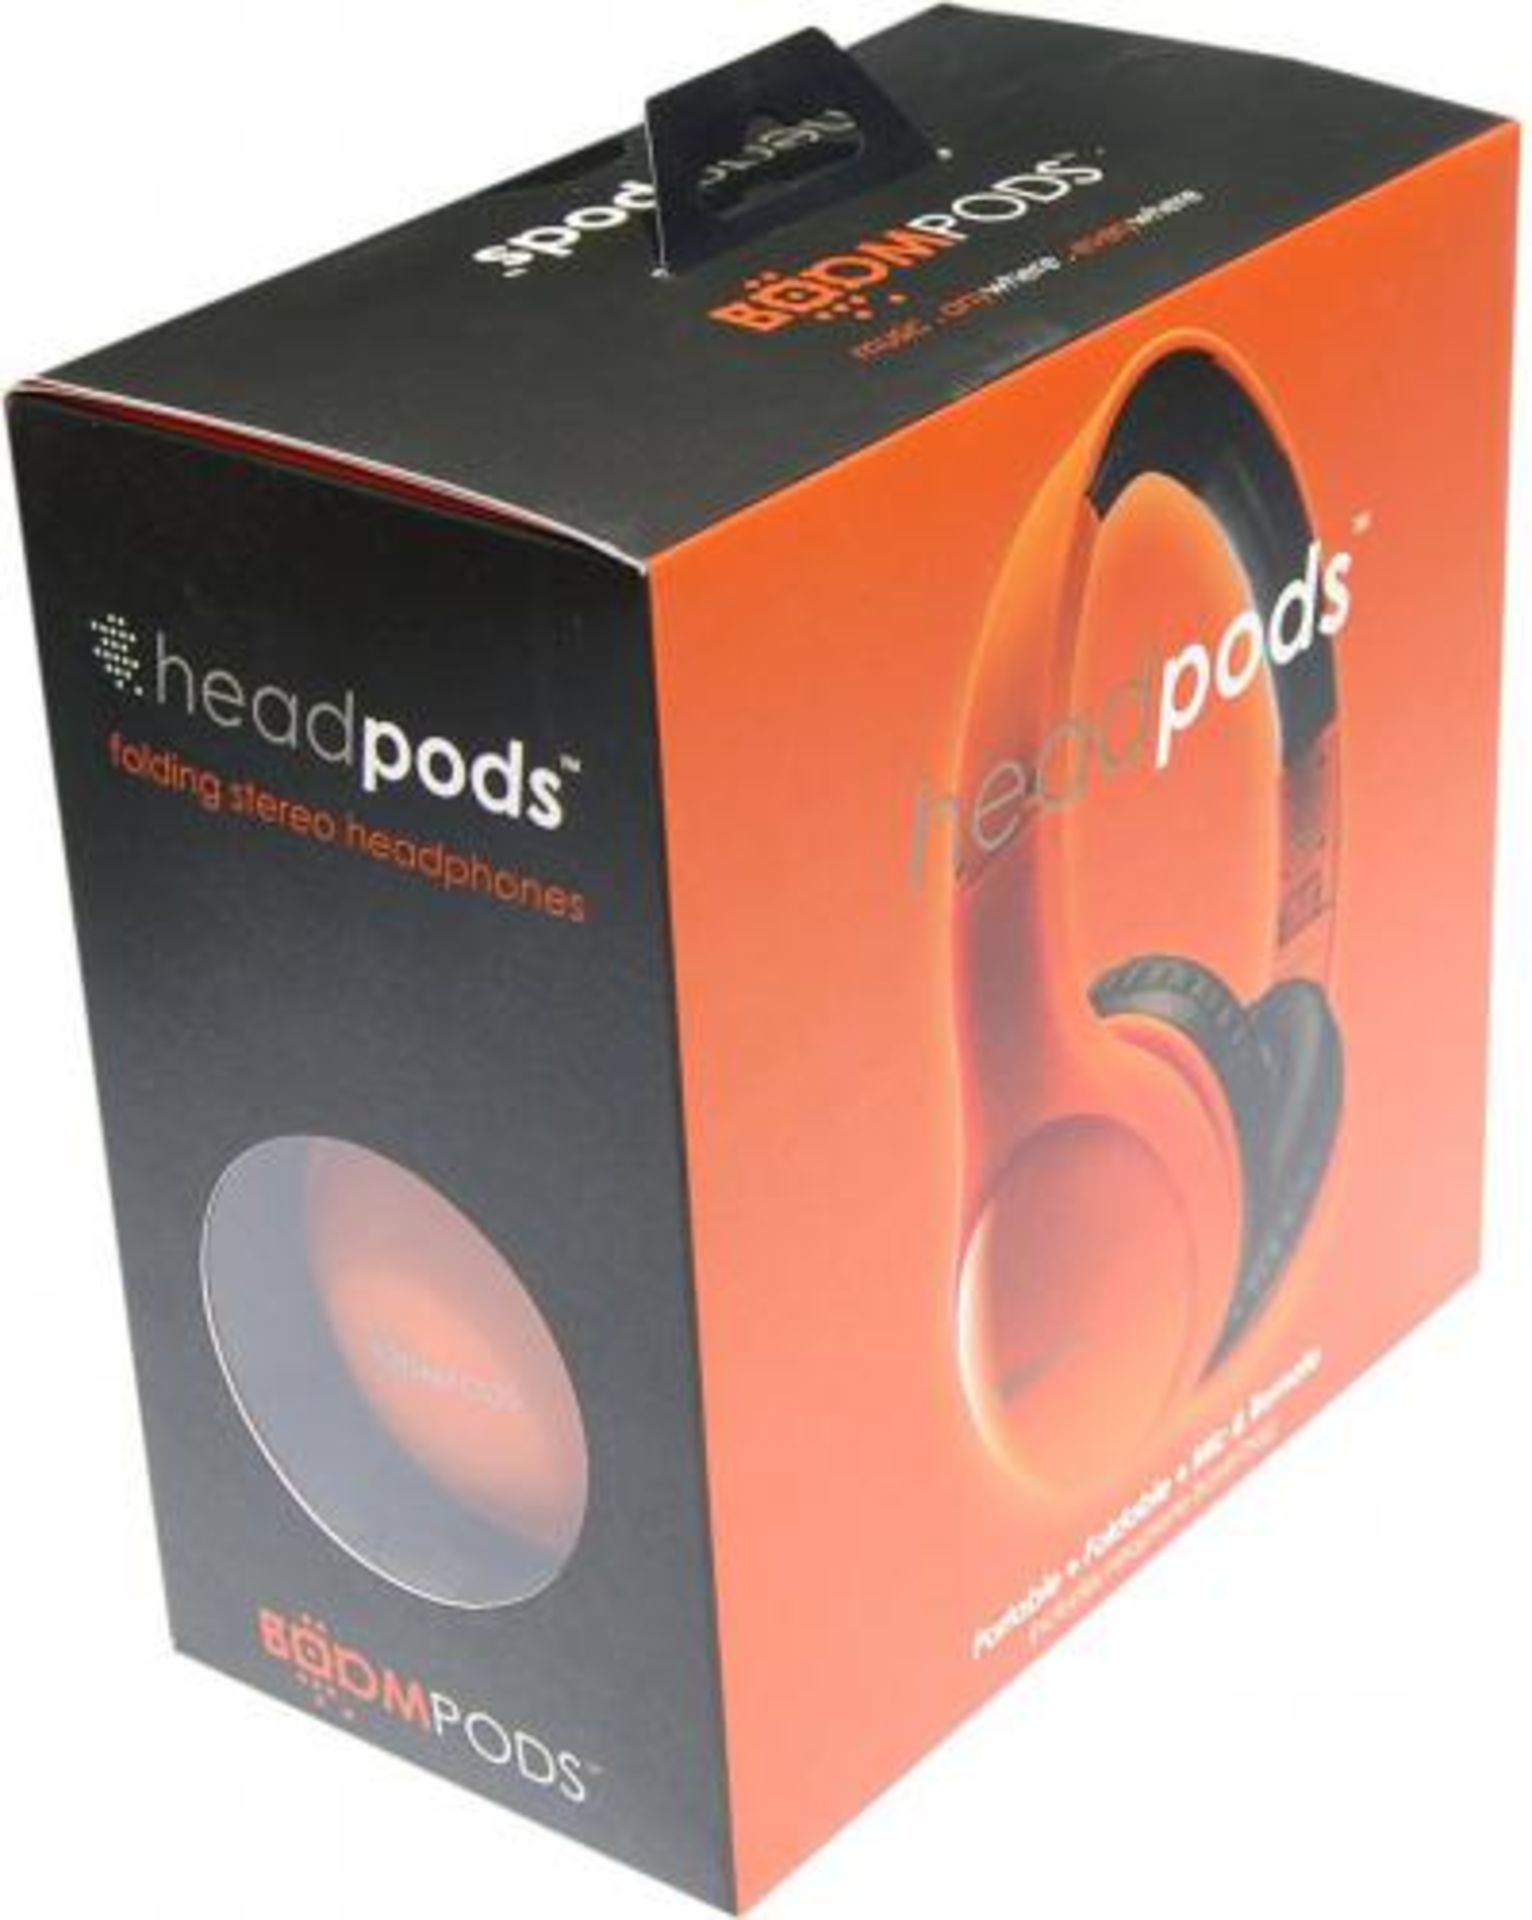 V Brand New Boom Pods Headpods Foldable Soft Touch Over Ear Stereo Headphones With Travel Pouch - Image 2 of 2